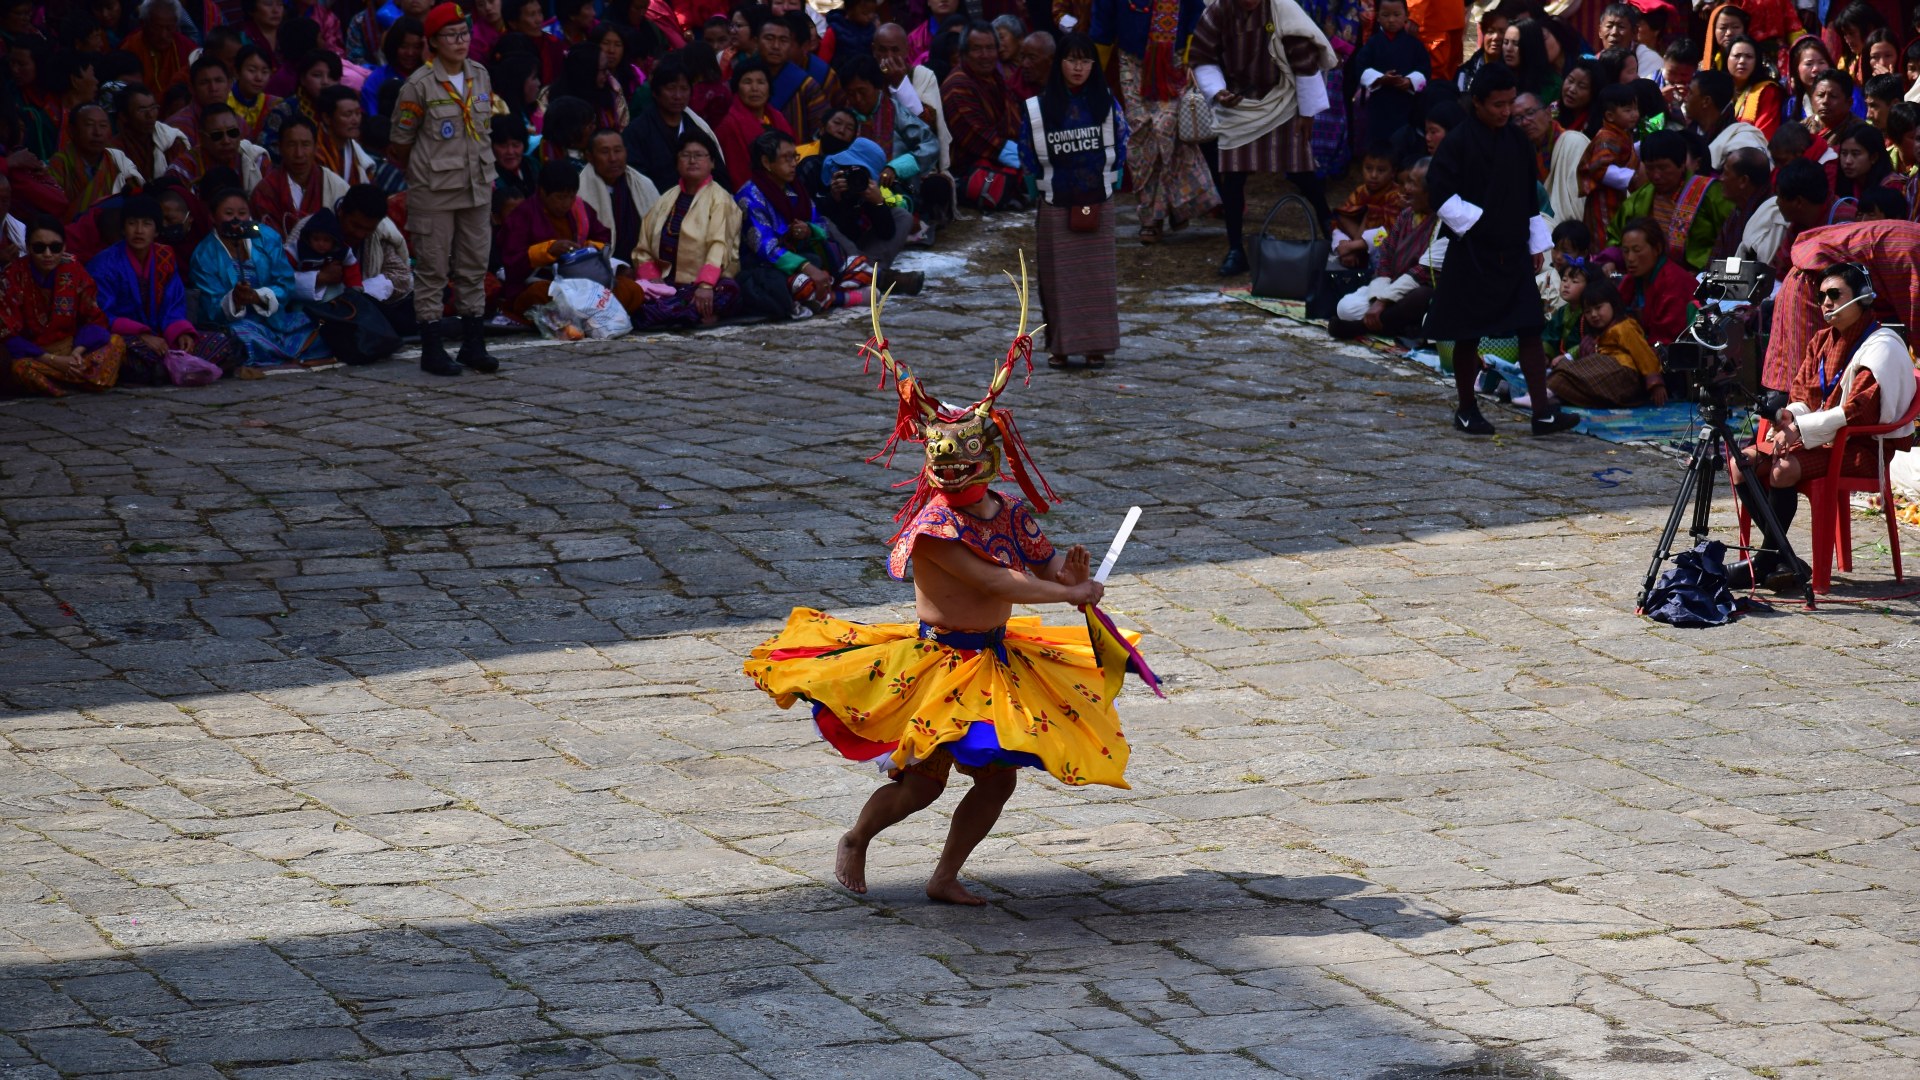 Dance of the Four Stags, Paro Festival